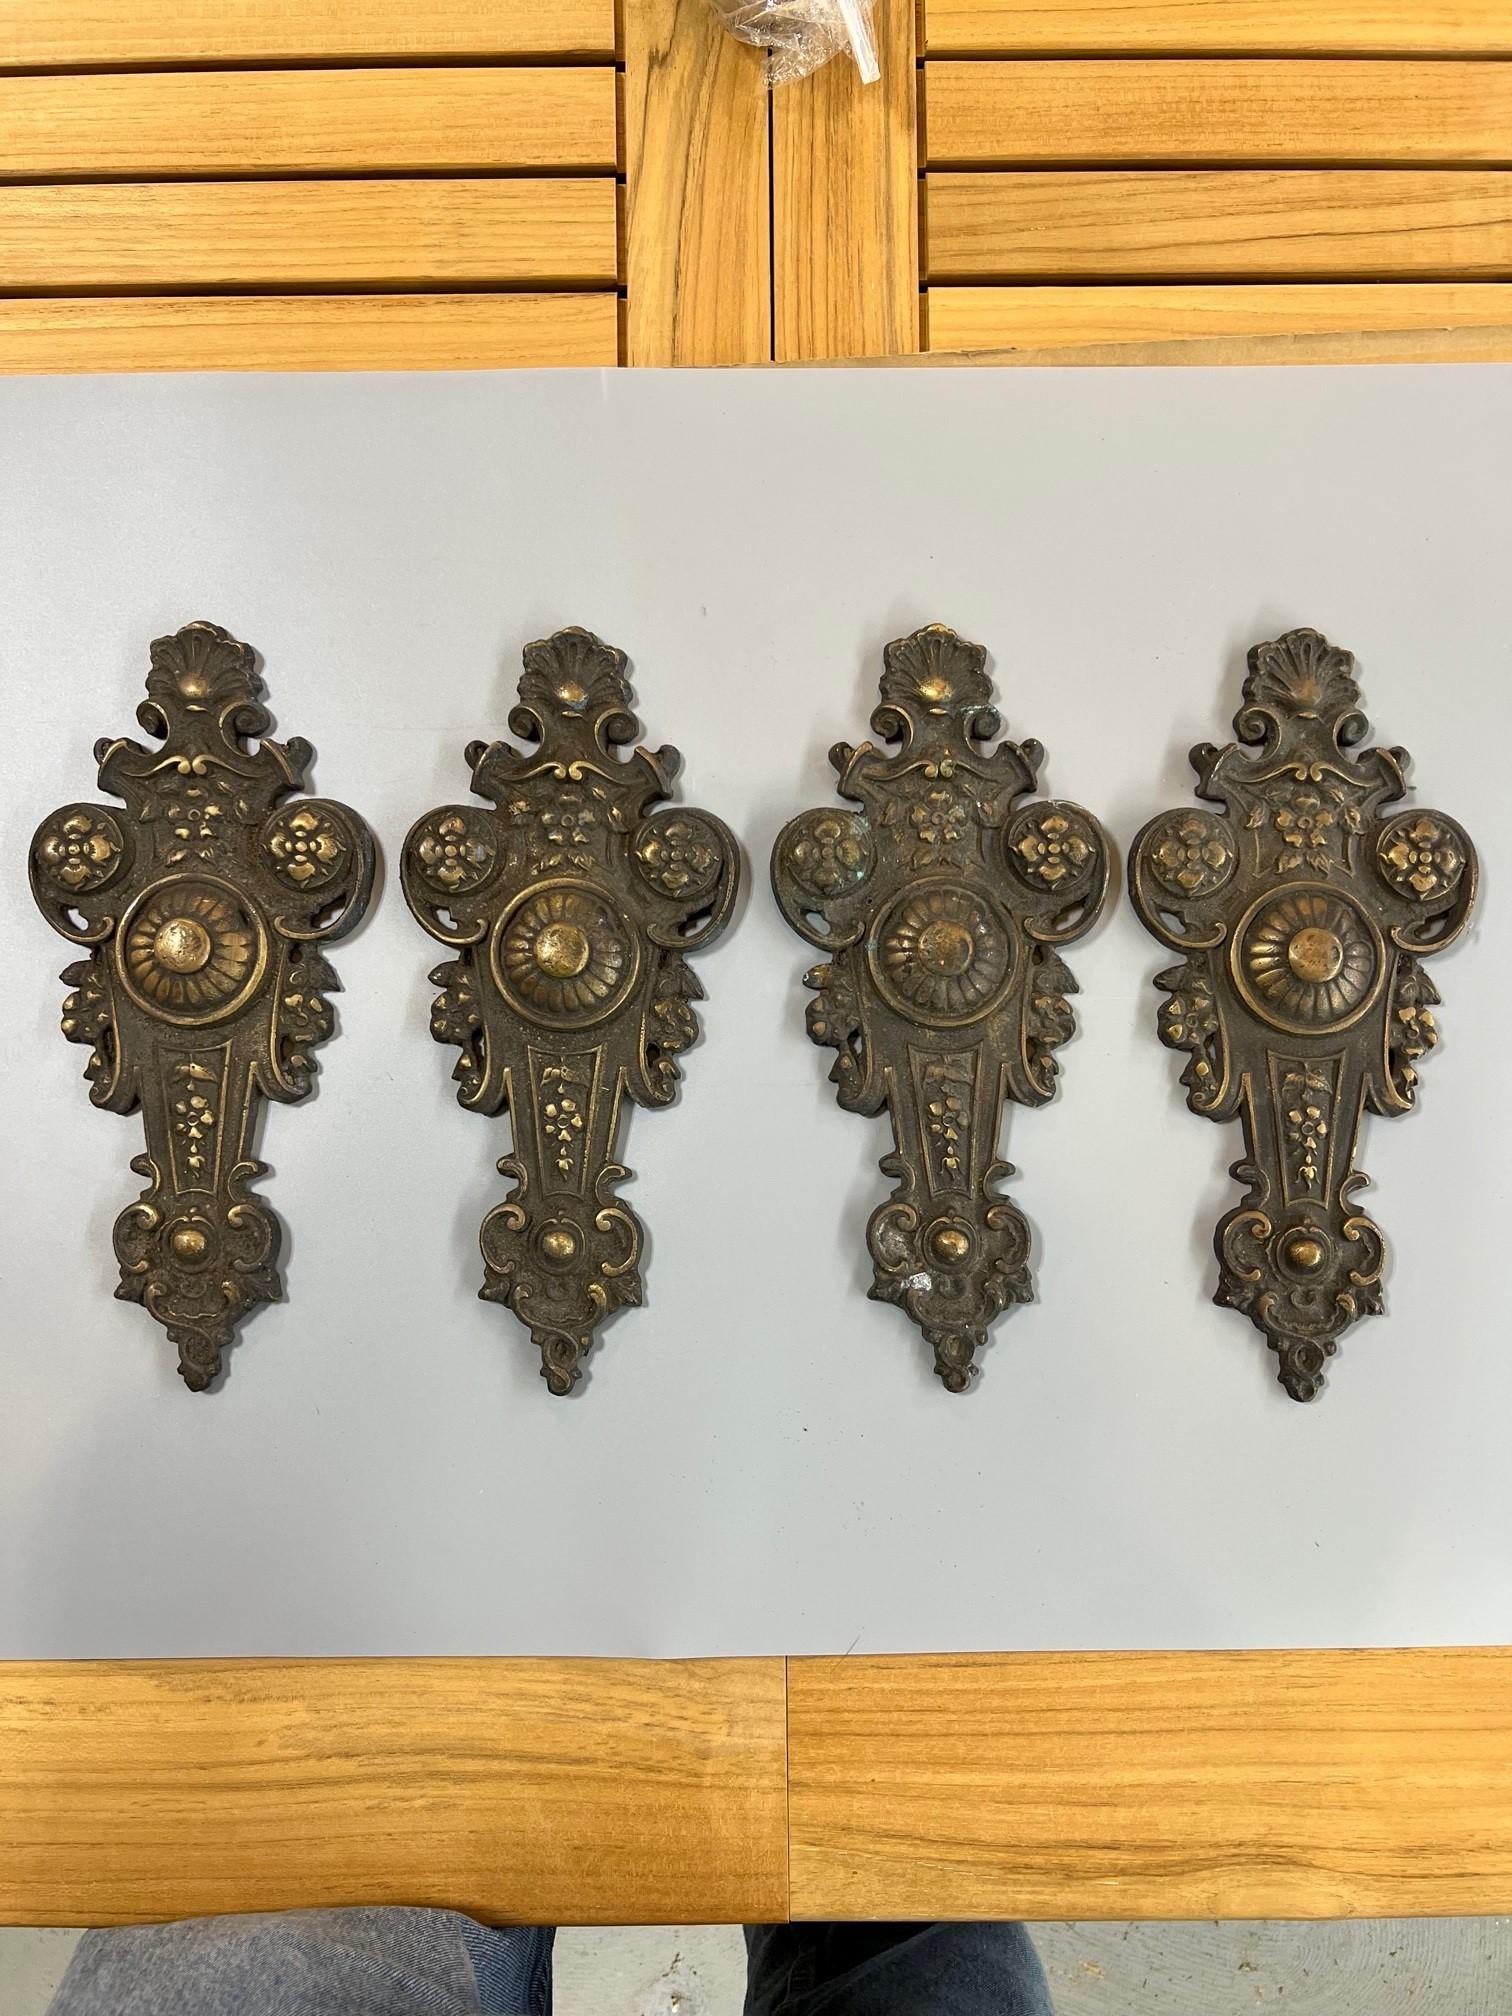 A nice set of 4 large cast bronze plaques I believe from the 1940s. This is the second set of cast bronze plaques I have purchased from a private collector and have on 1stDibs. I do not think the plaques have ever been used and its nice to have a